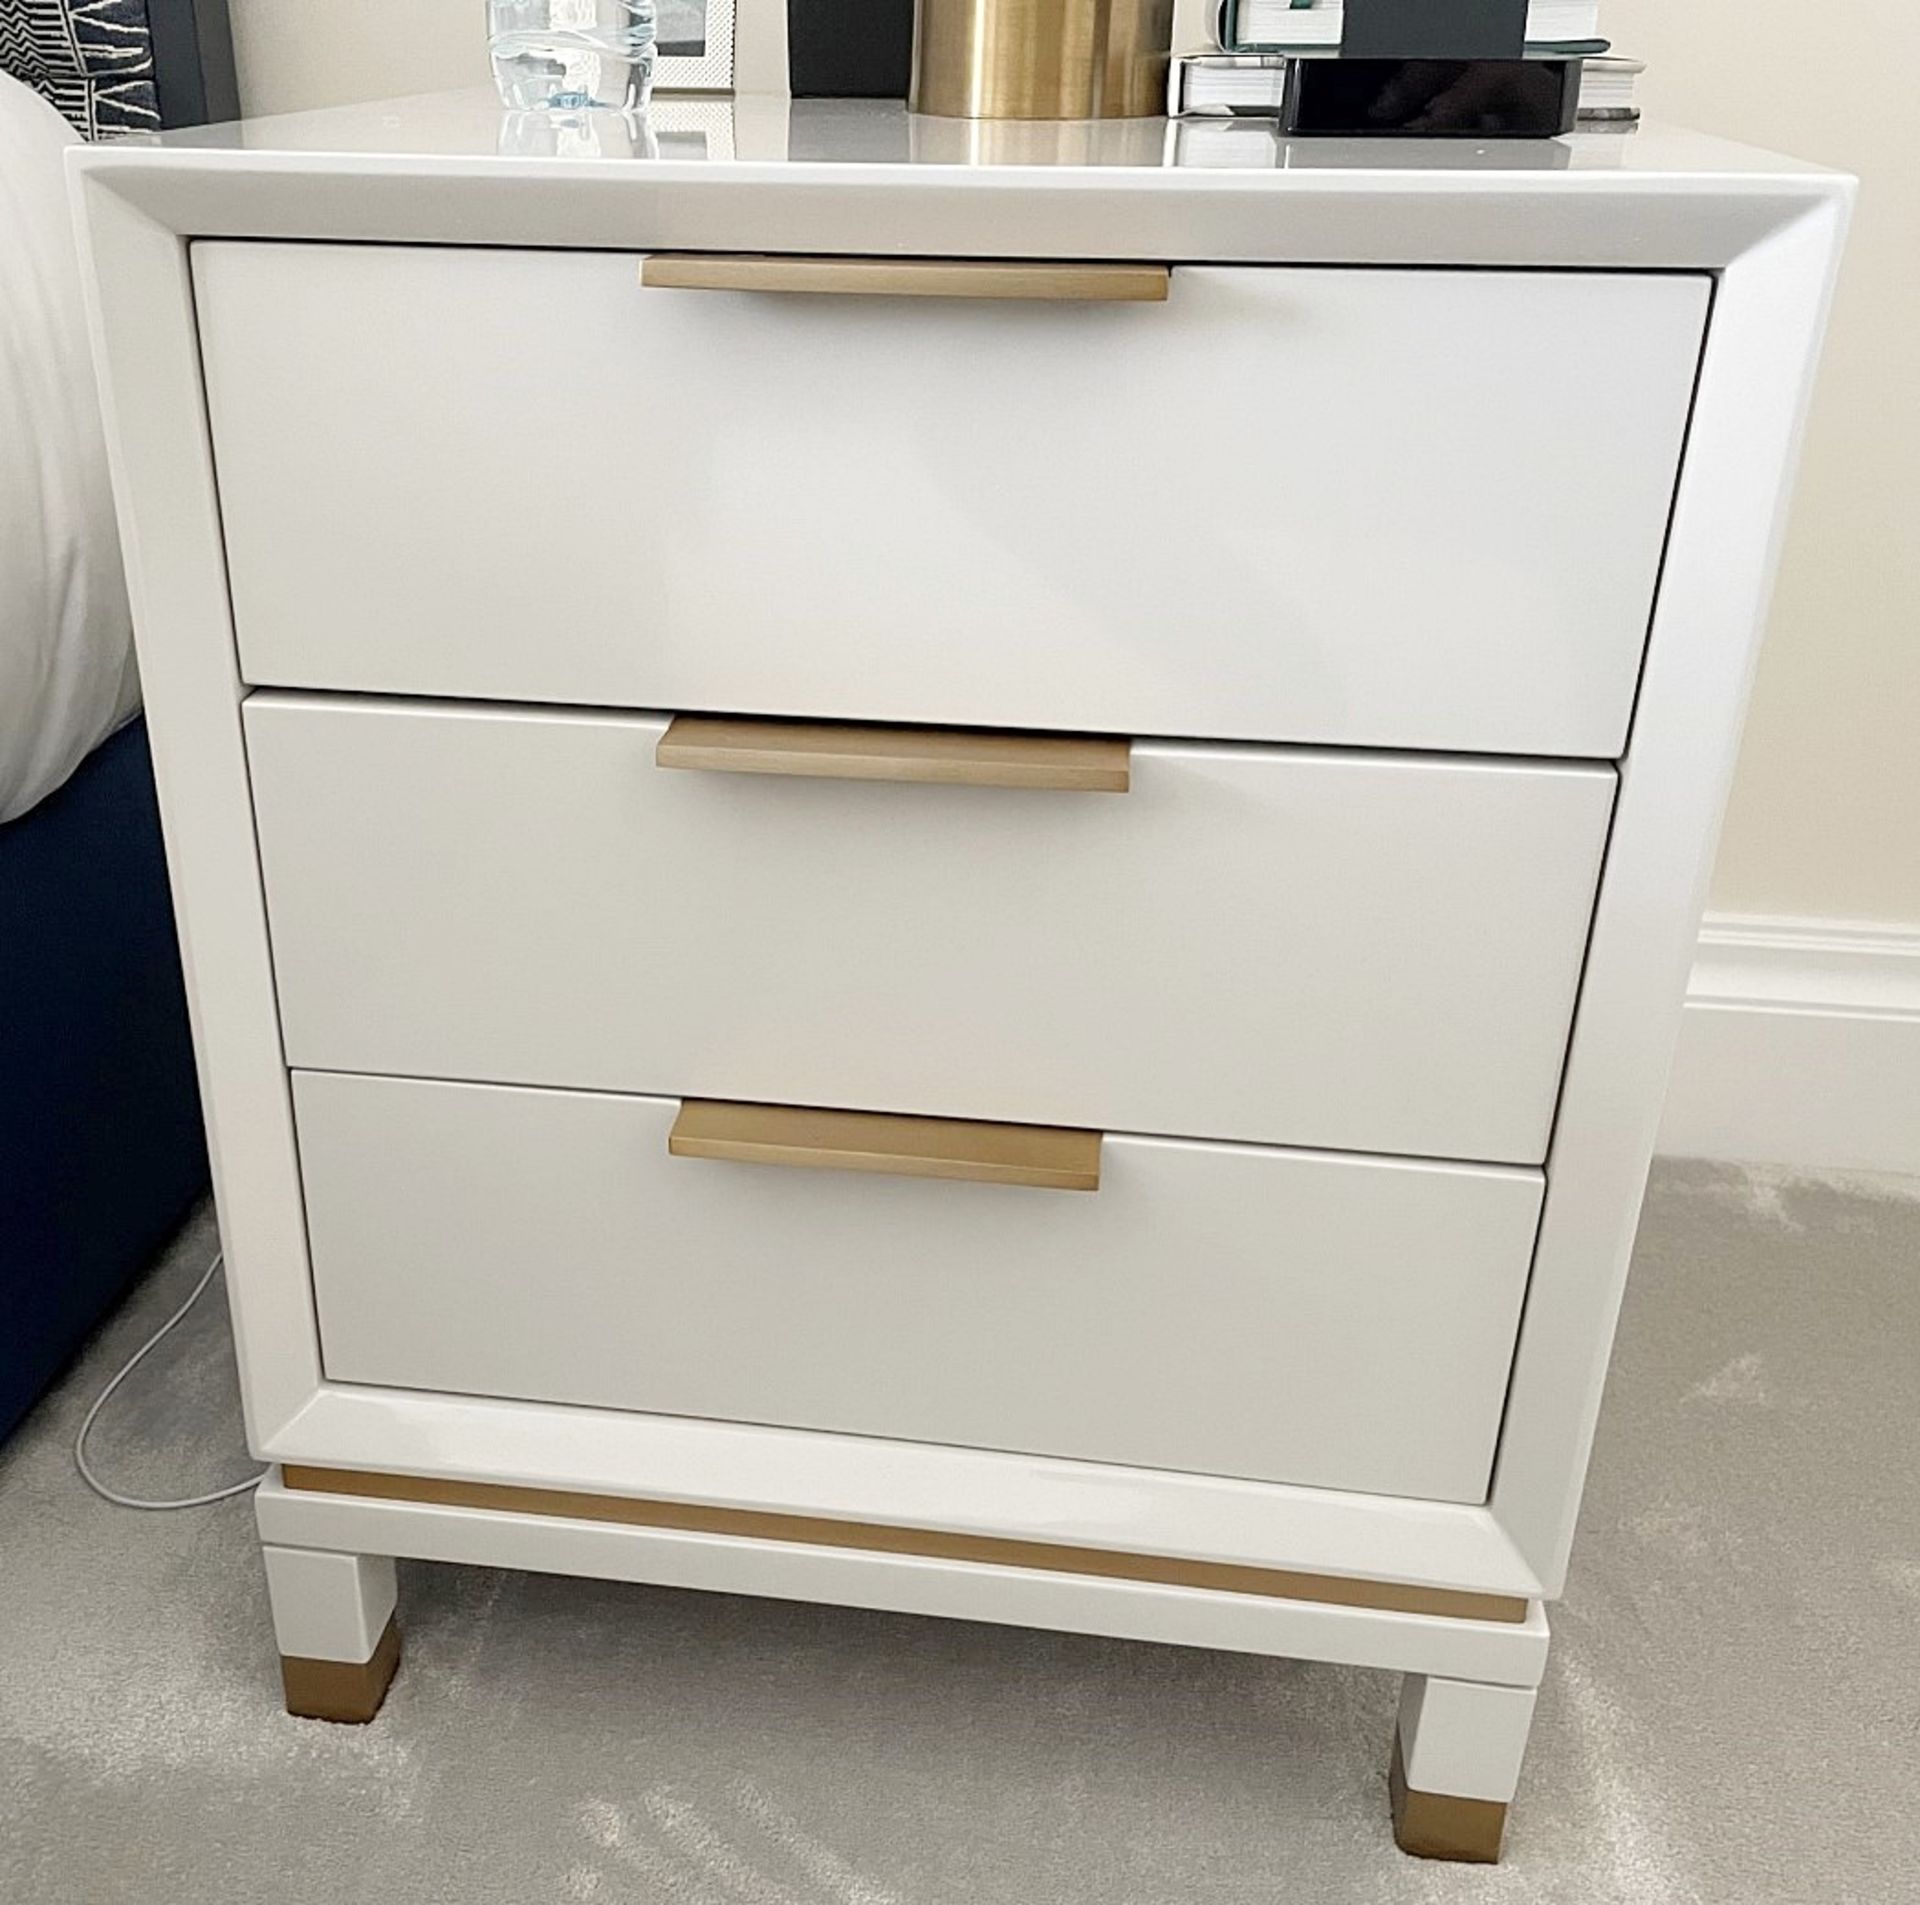 Pair Of Luxury Designer Bedside Tables With Soft-Close Drawers - NO VAT ON THE HAMMER - Image 3 of 8